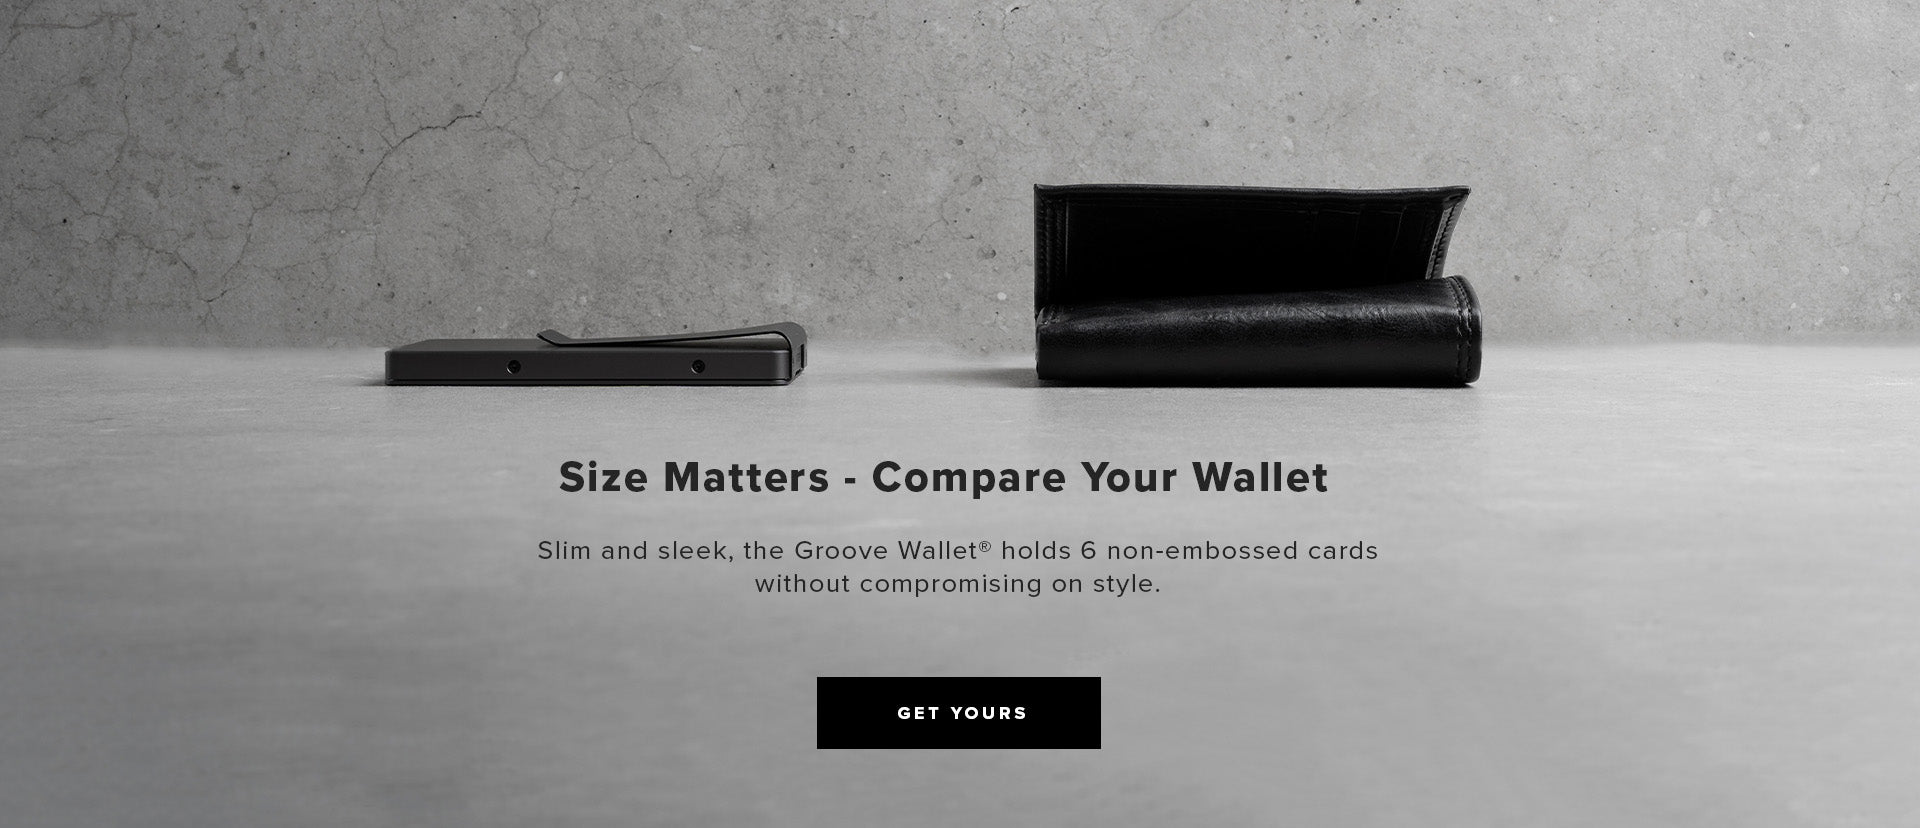 Compare Your Wallet